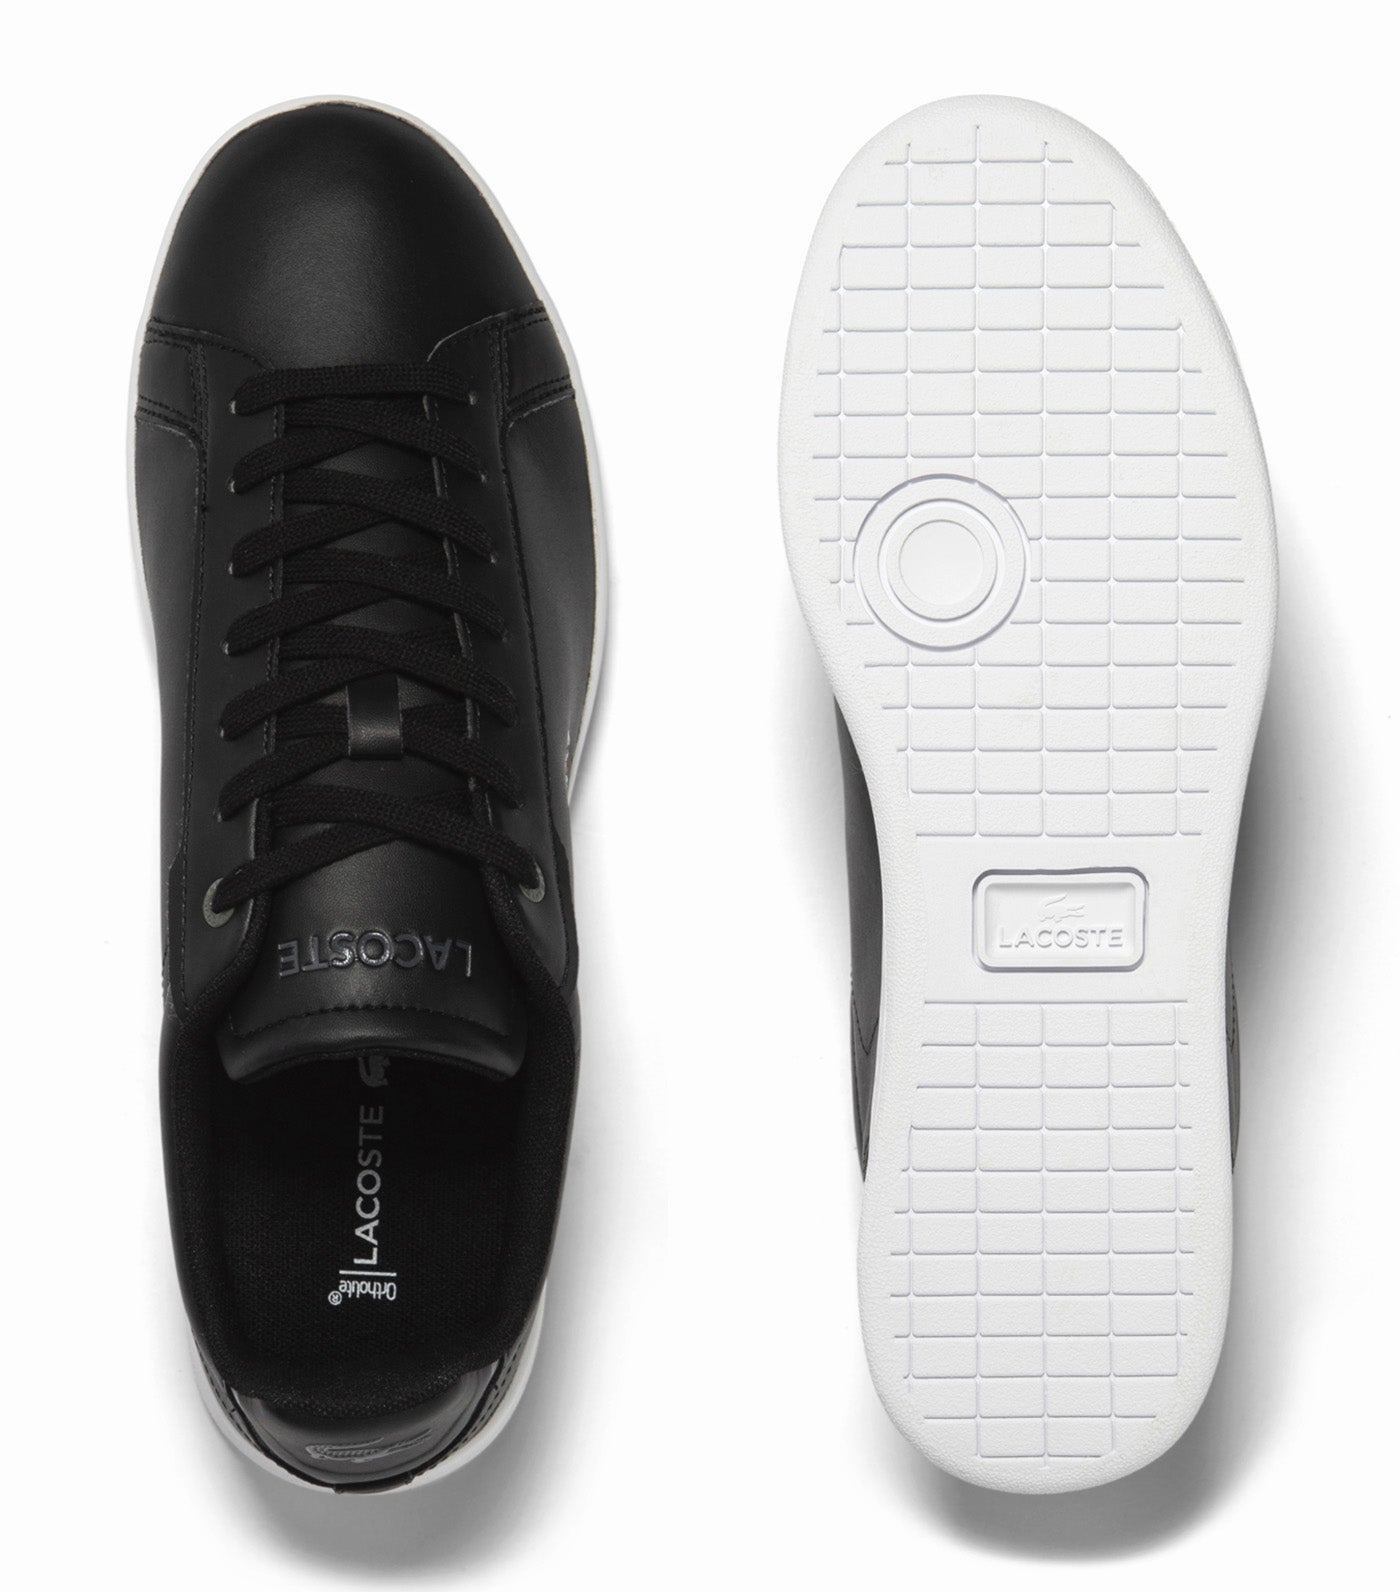 Men's Lacoste Carnaby Pro BL Leather Tonal Sneakers Black/White